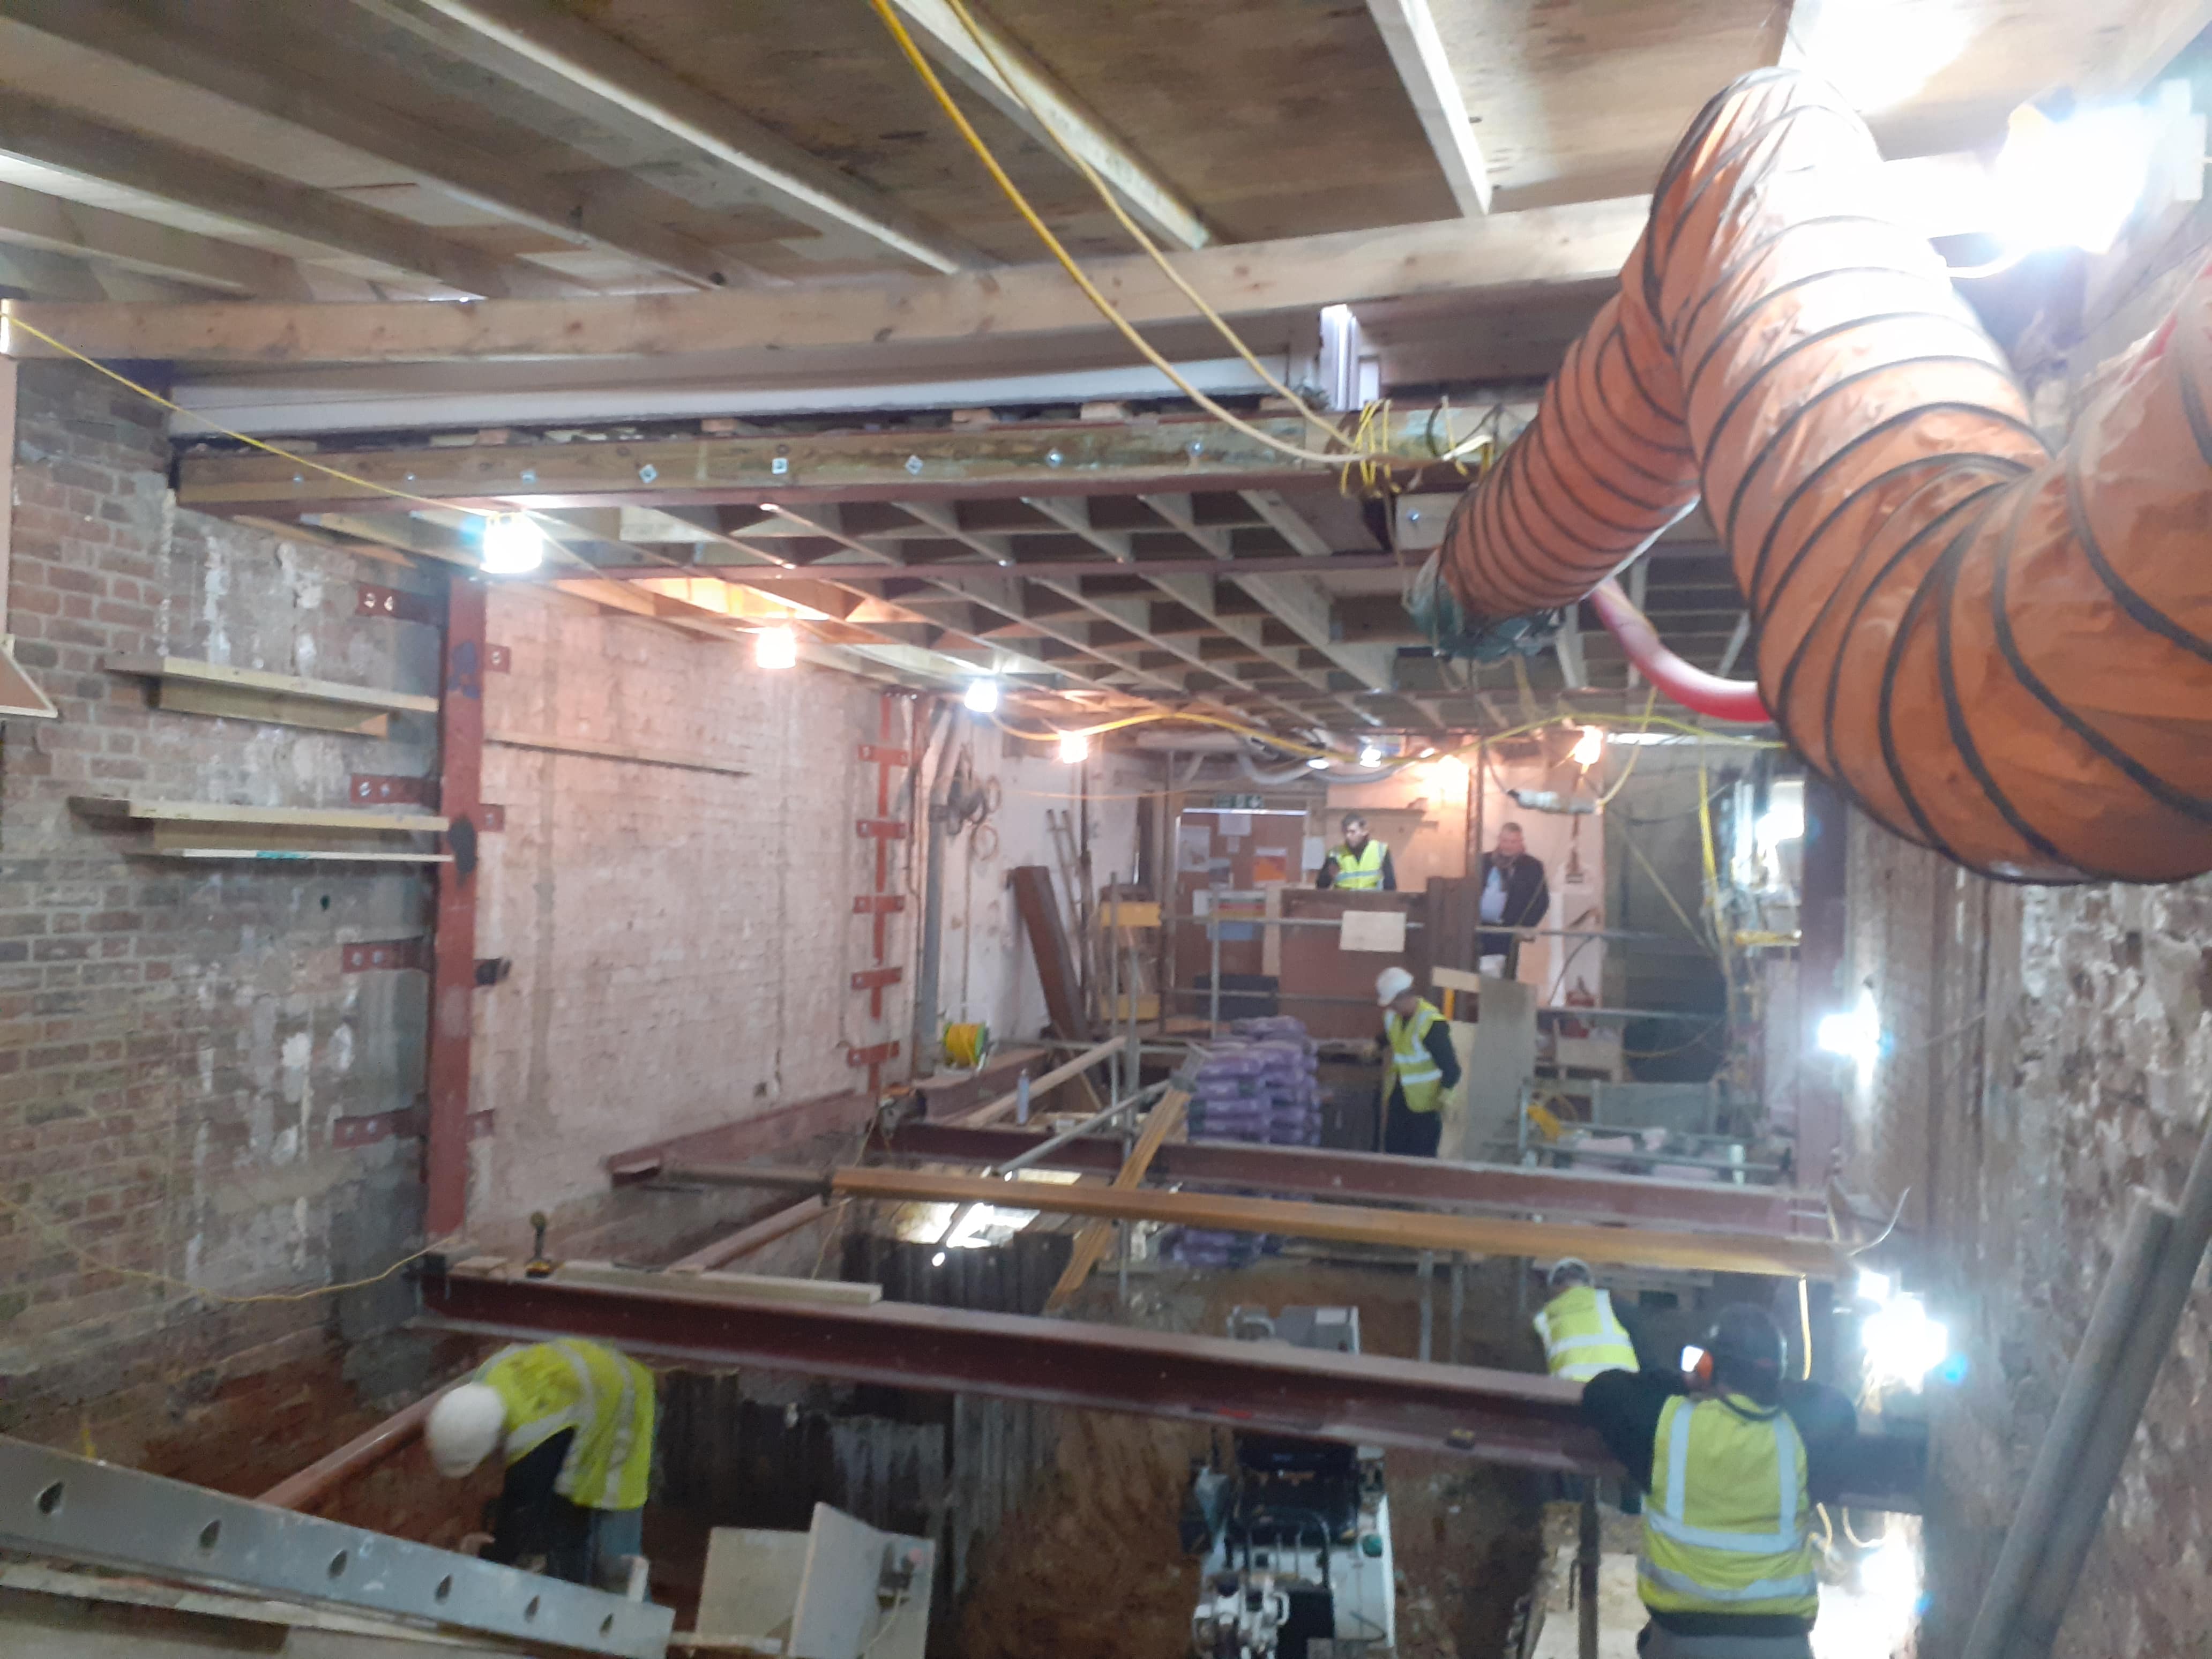 A construction site showing a basement being converted into an extension with men in high visibility jackets working on metal and wooden beams